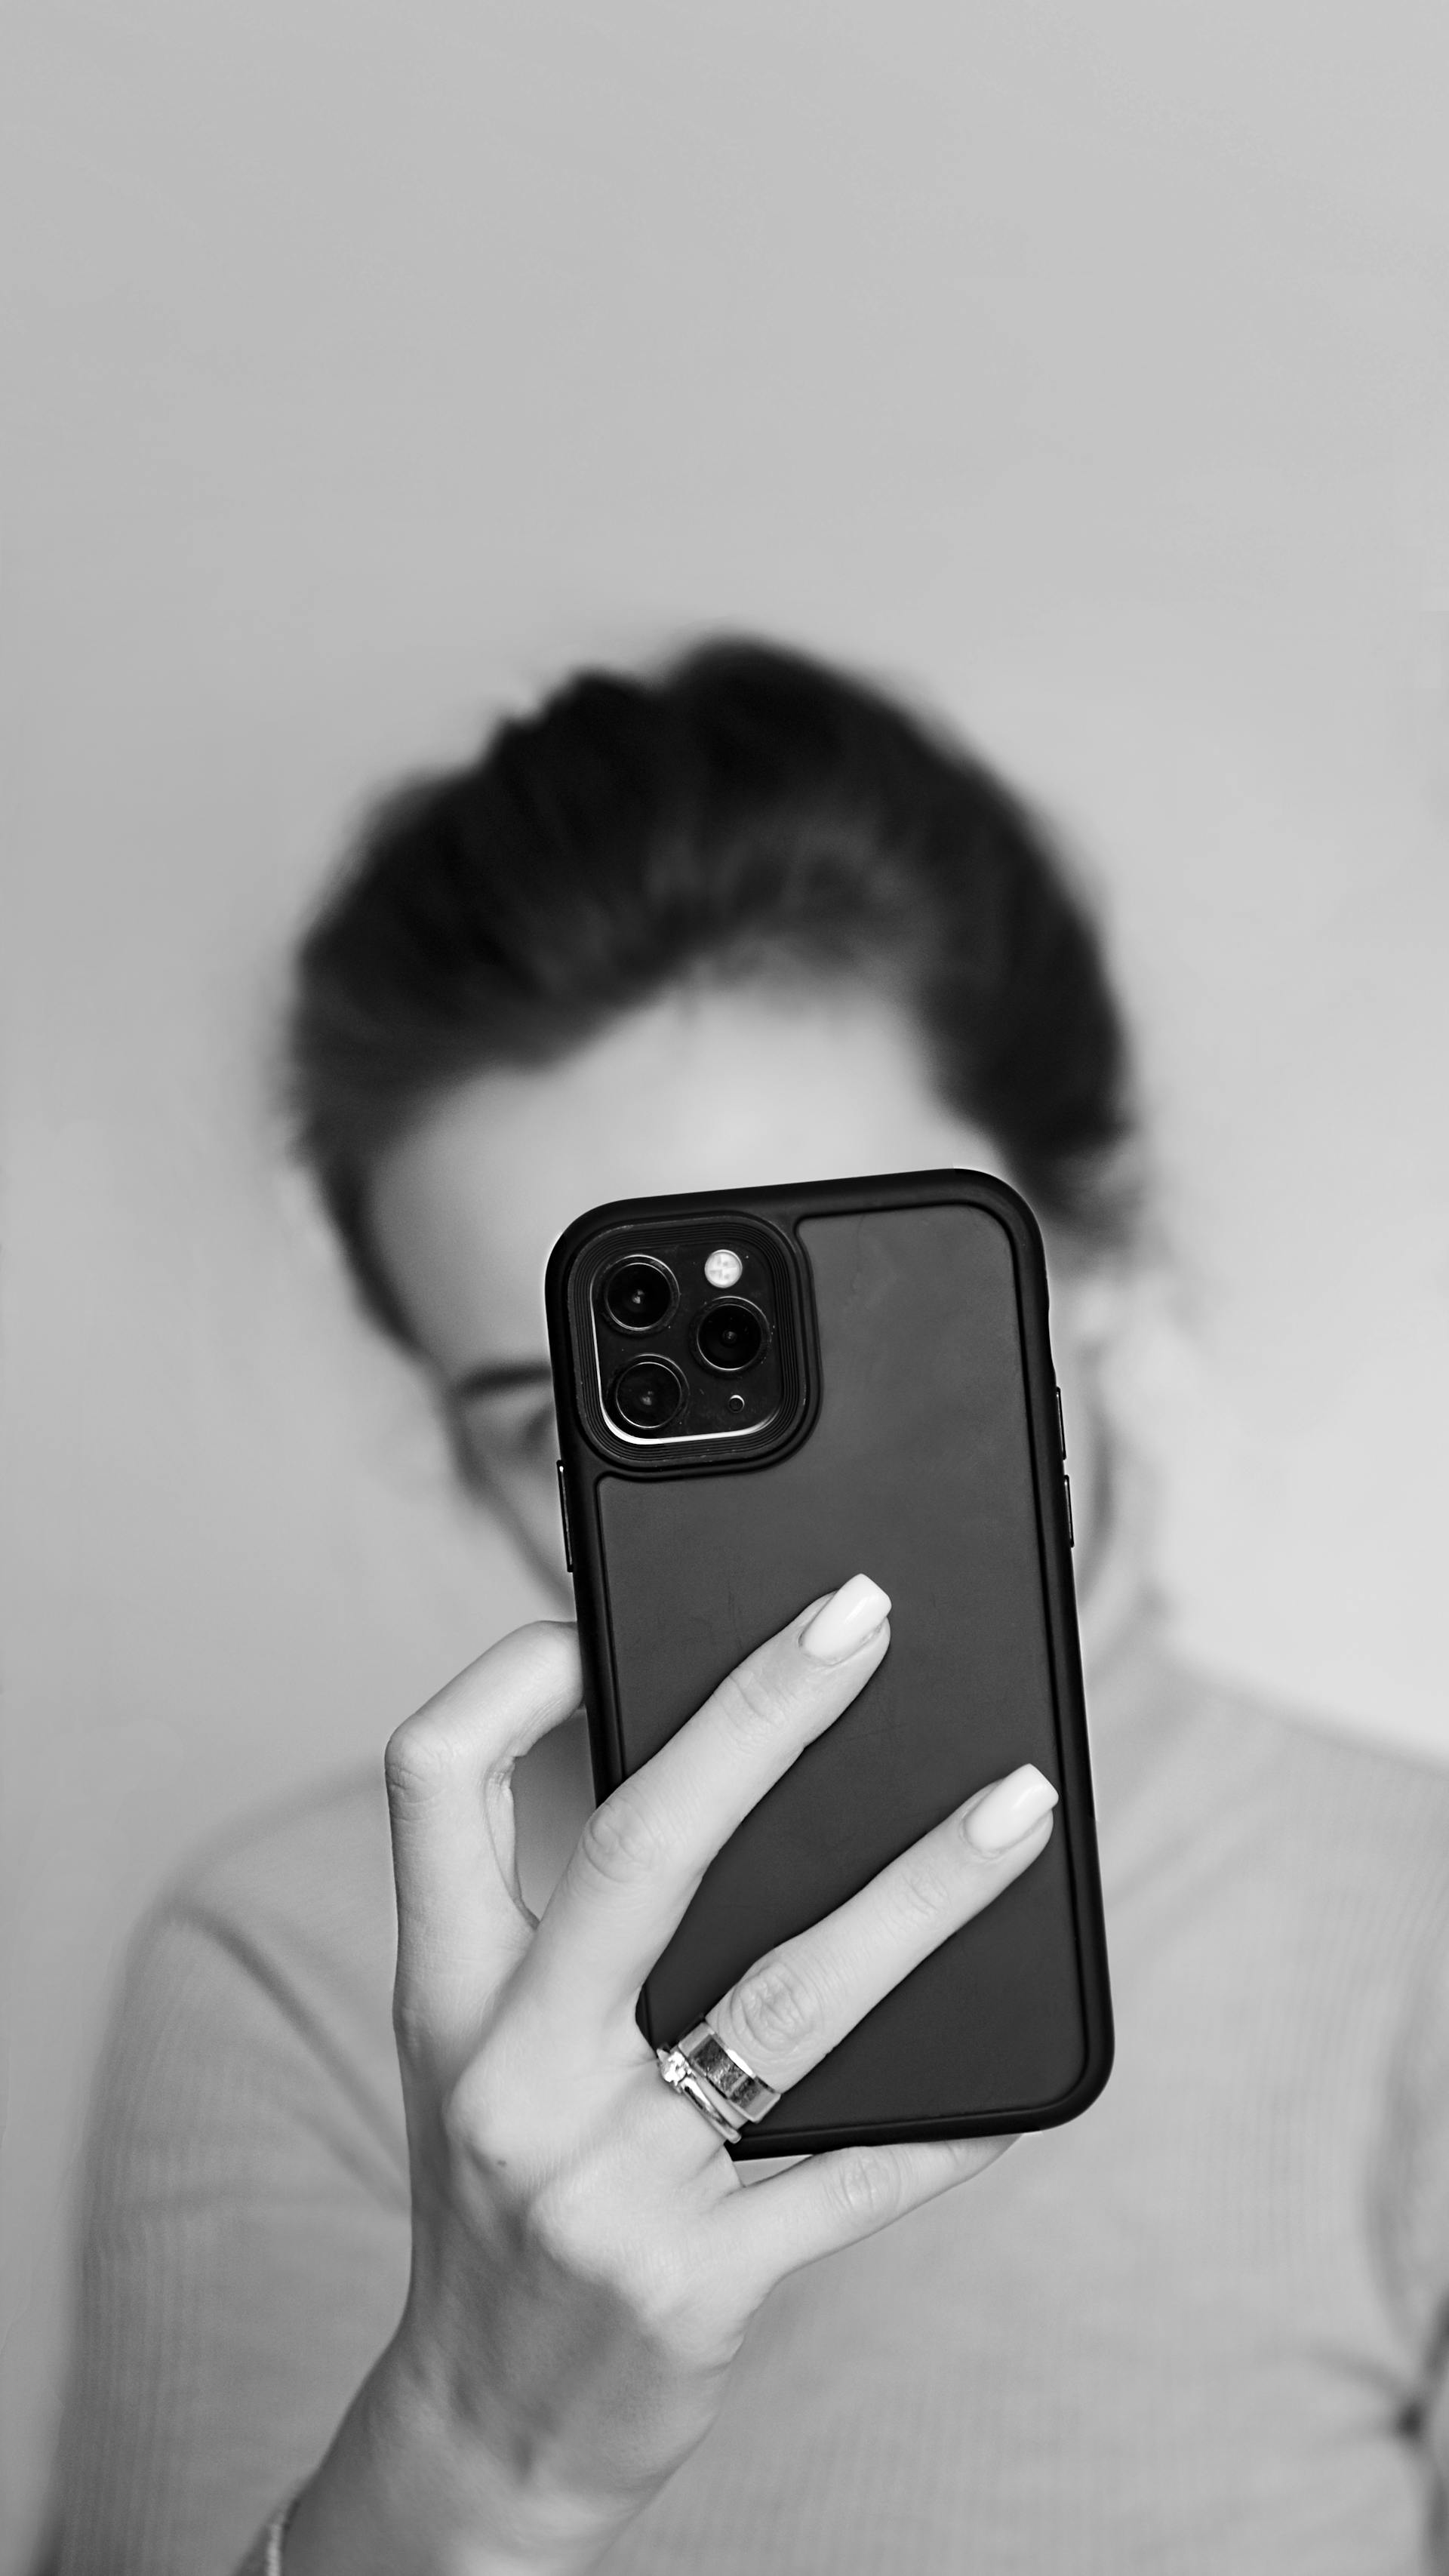 A woman holding her cell phone | Source: Pexels